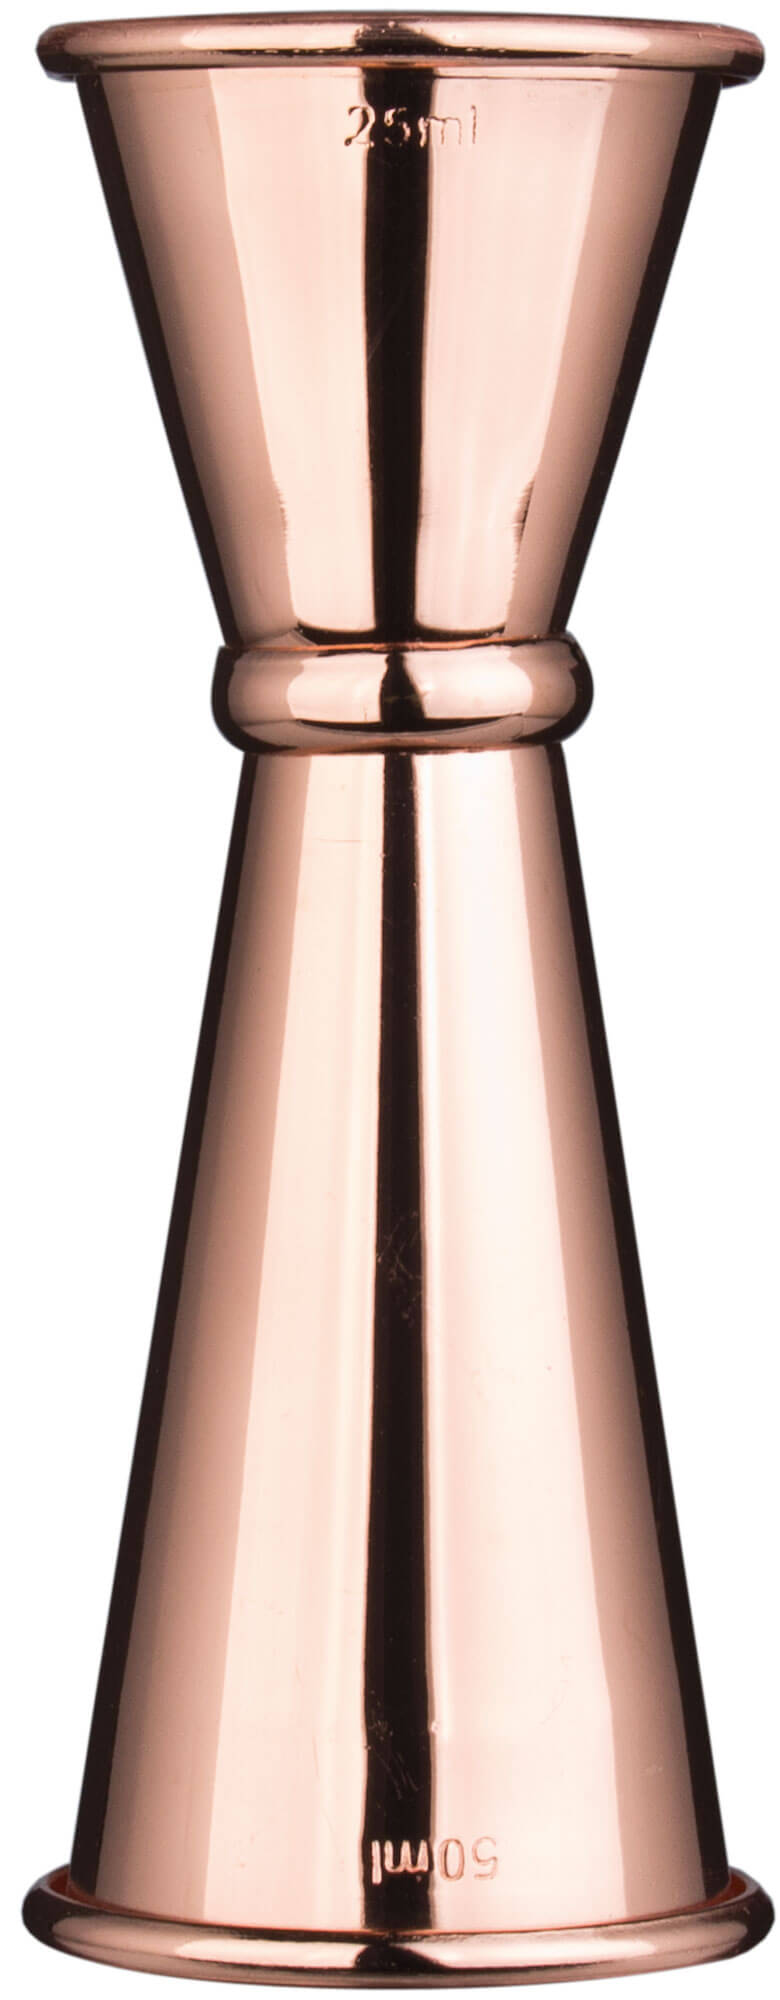 Jigger copper colored - stainless steel (25/50ml)